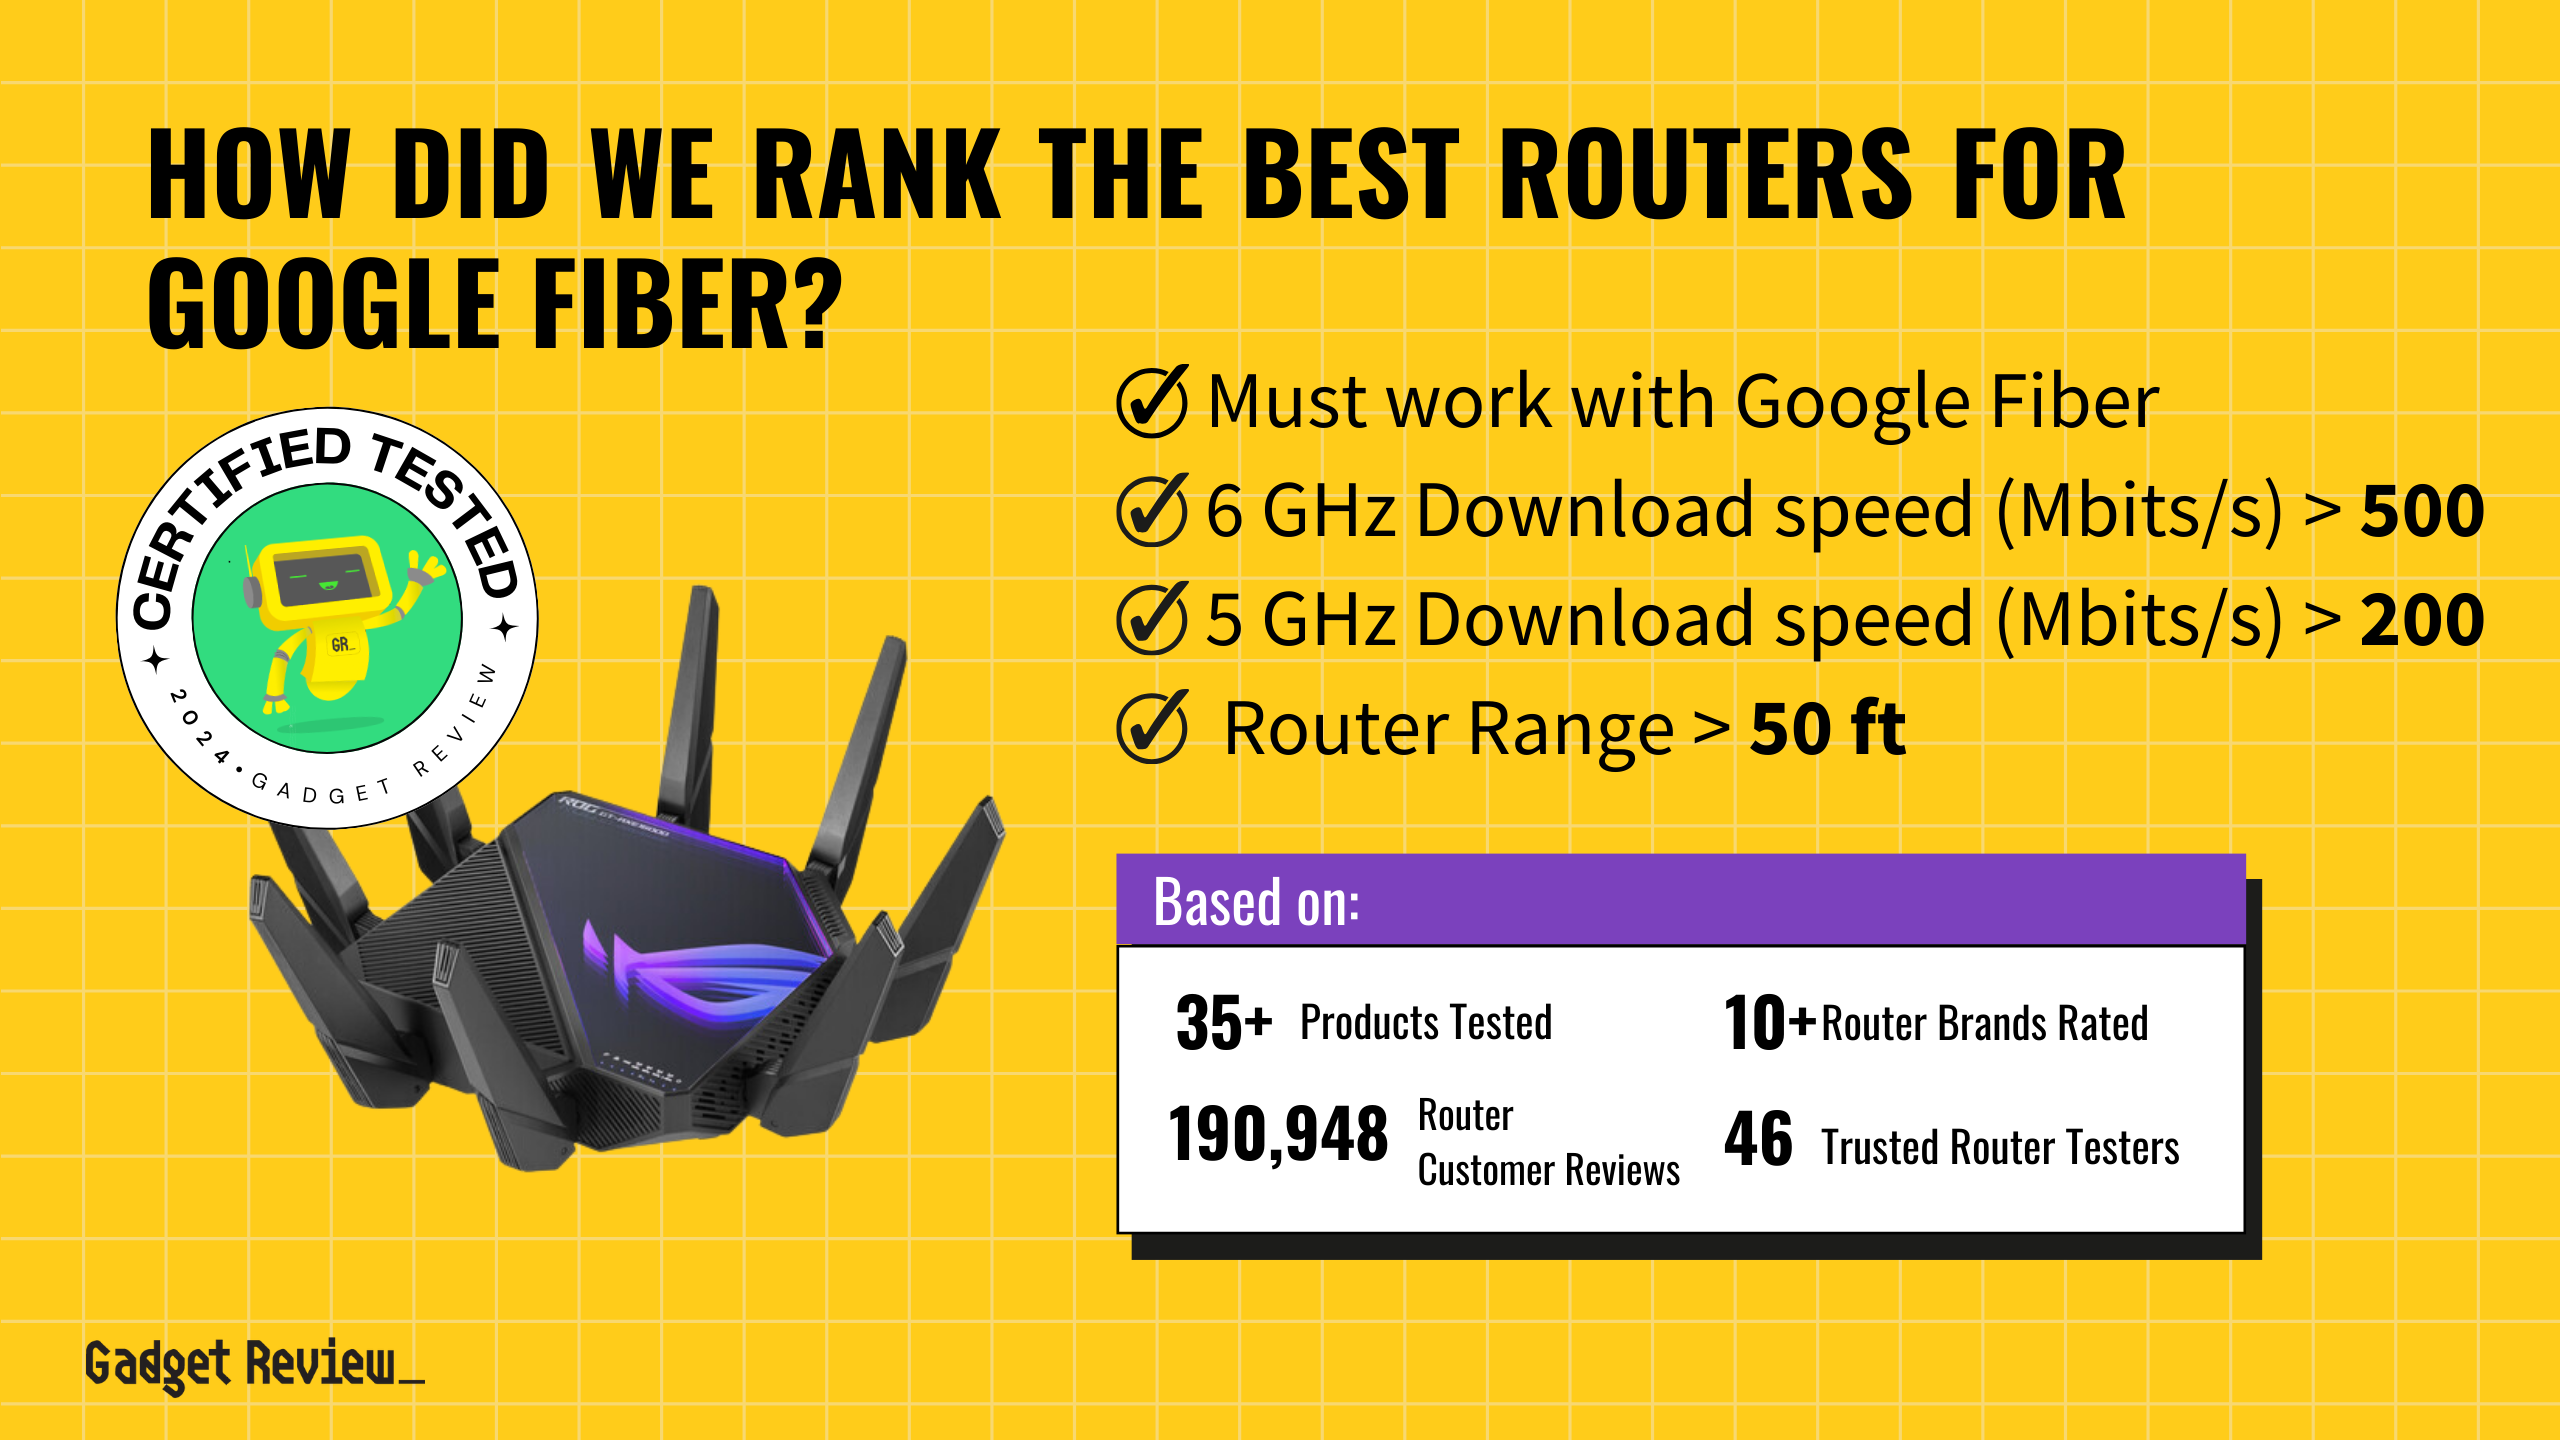 What are the Top 4 Routers for Google Fiber?